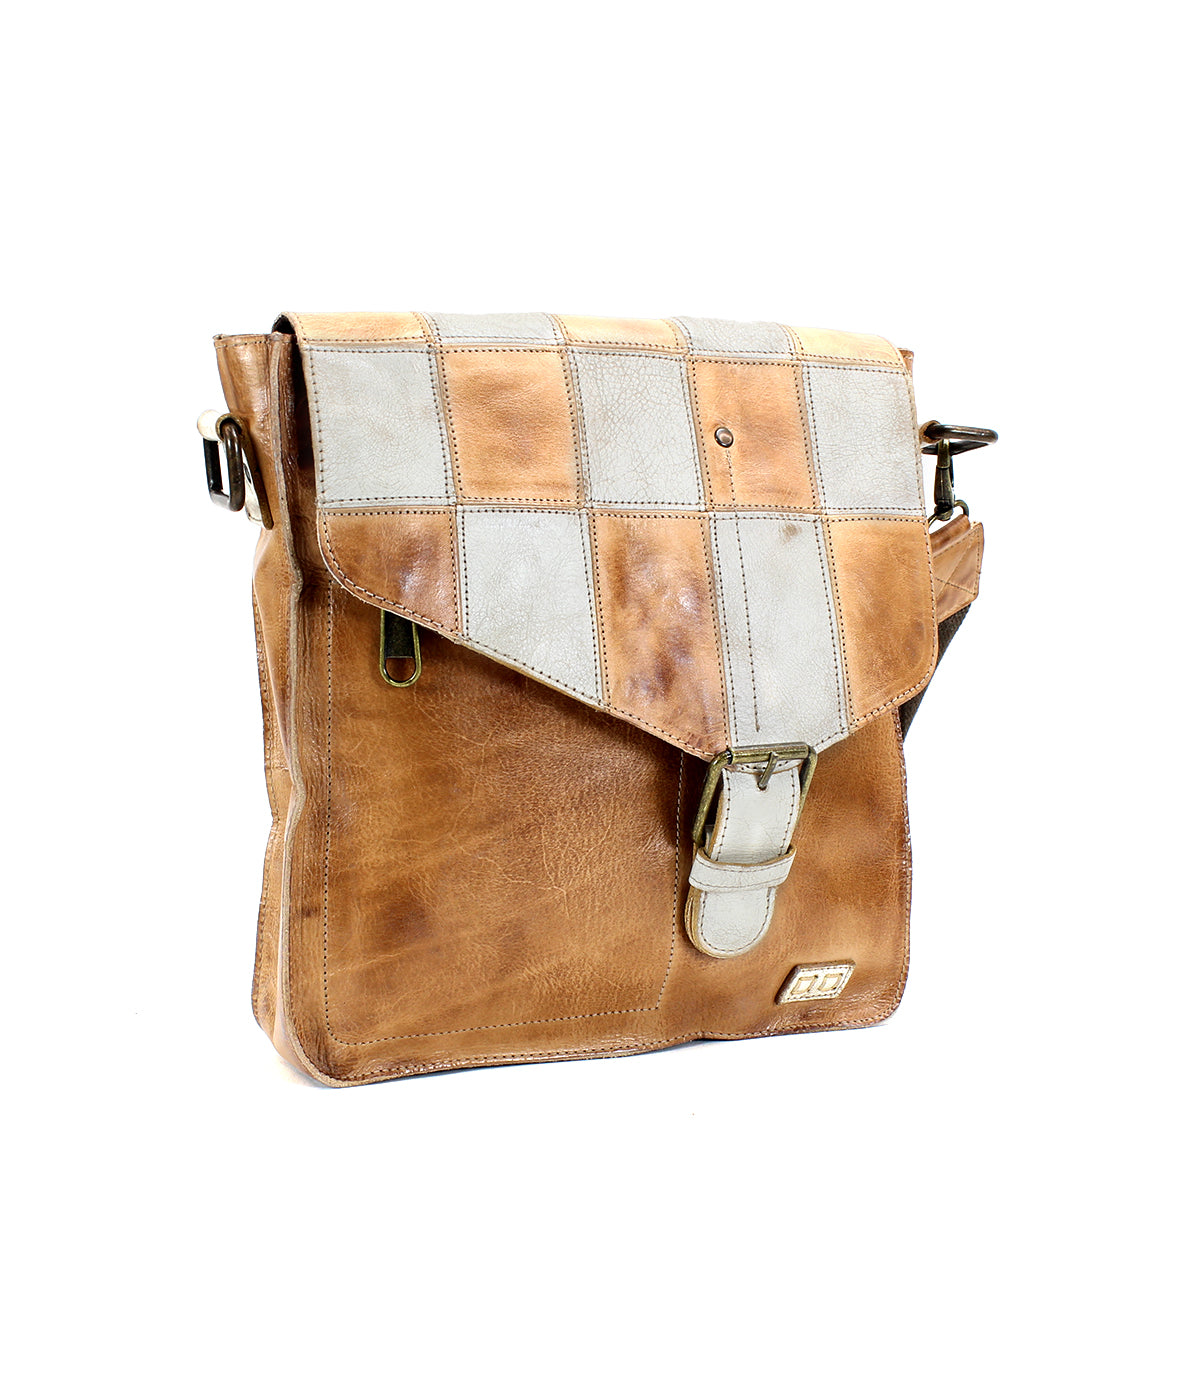 A brown and cream leather Venice Beach II messenger bag with a checkered front panel, displayed on a white background by Bed Stu.